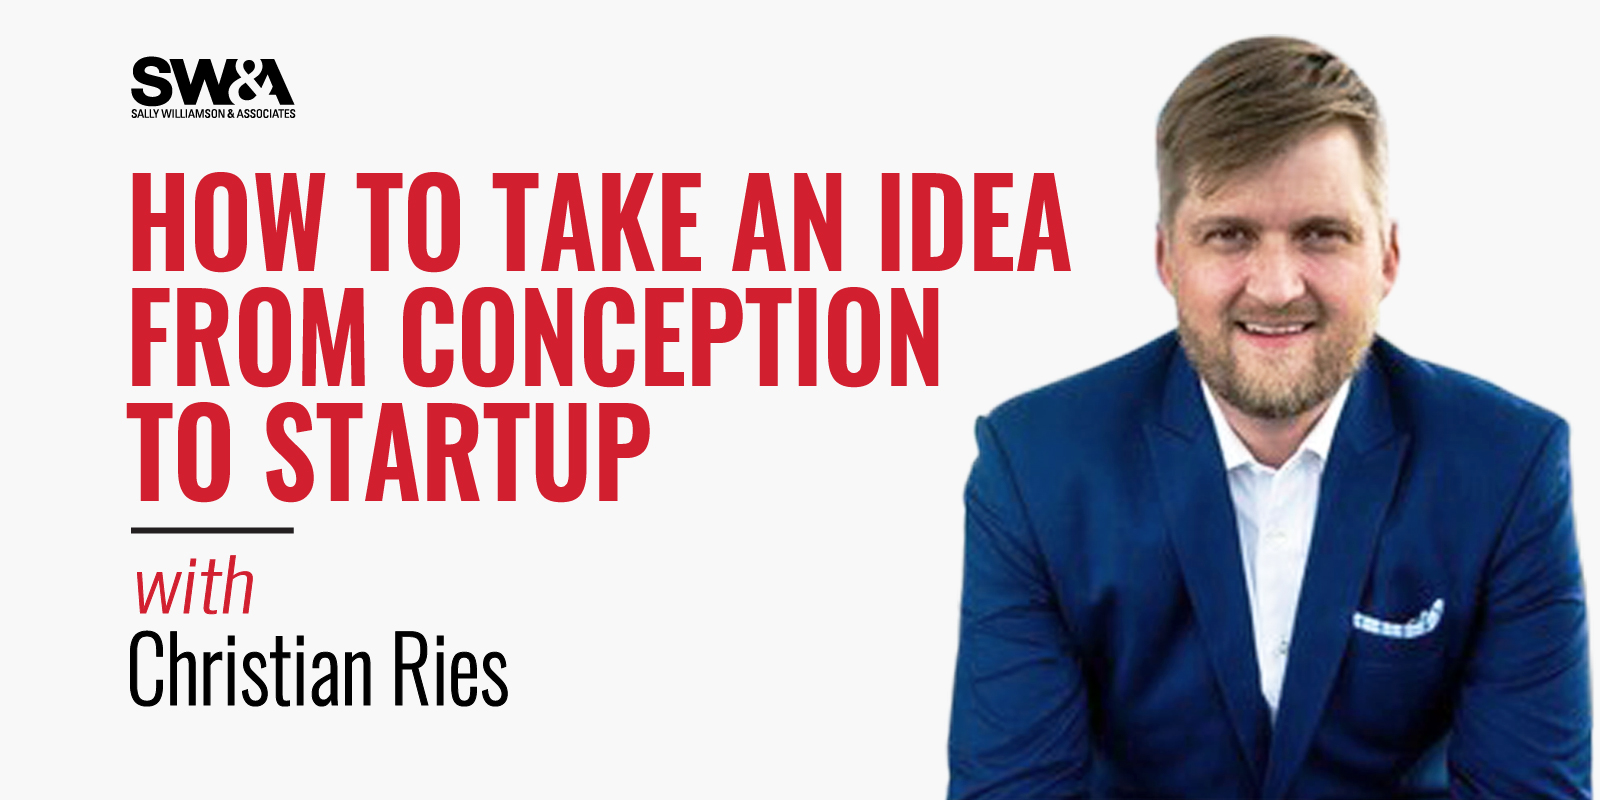 How to Take an Idea from Conception to Startup with Christian Ries